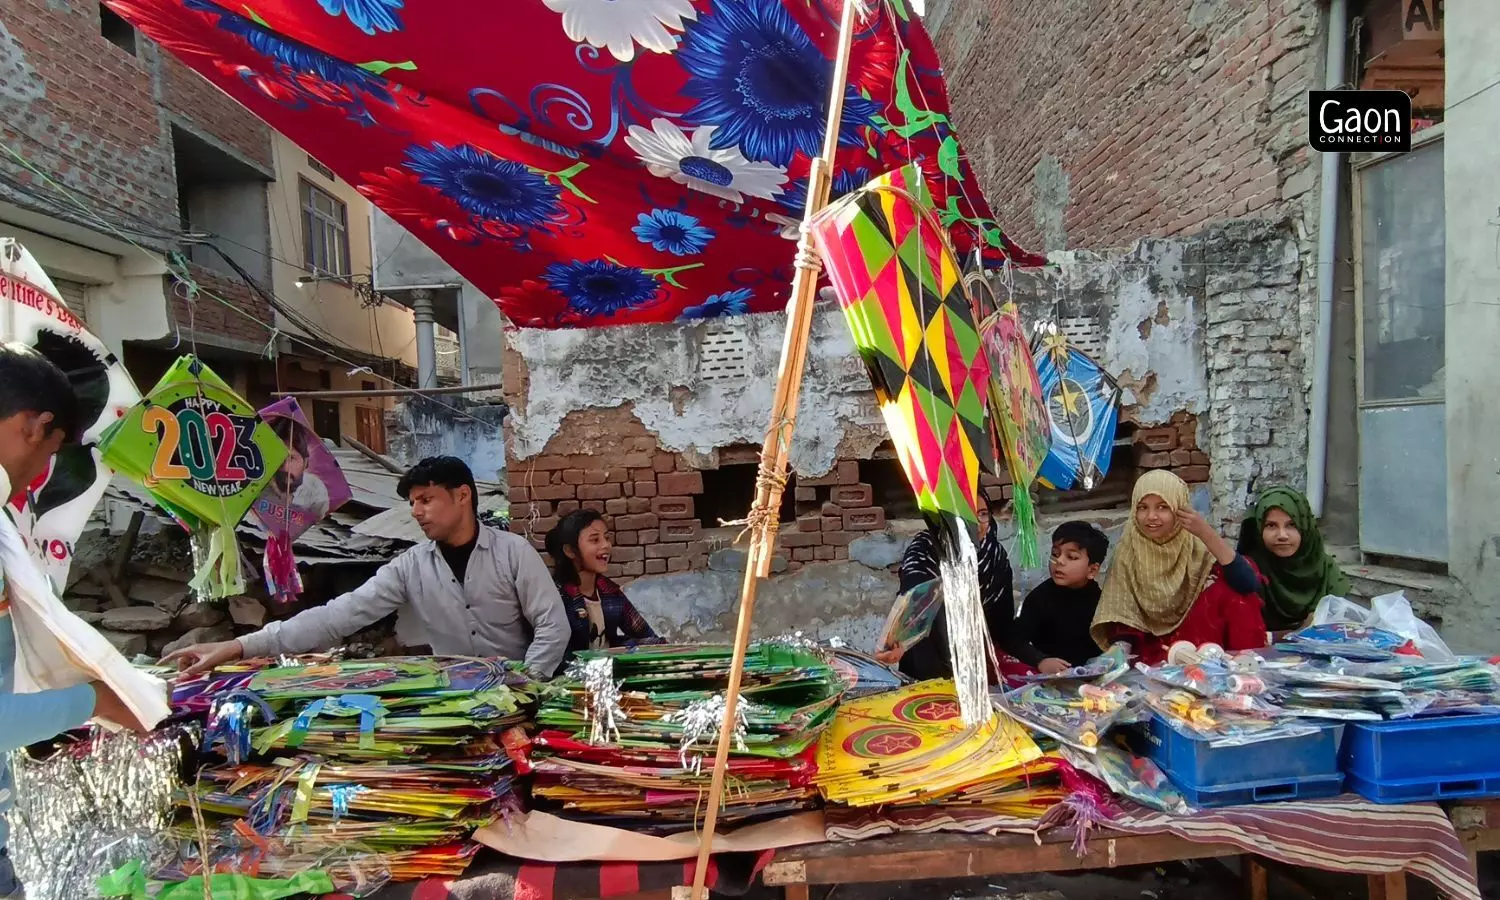 Although the art of kite making has been followed by people for generations, many shopkeepers are apprehensive in letting their children take this up.